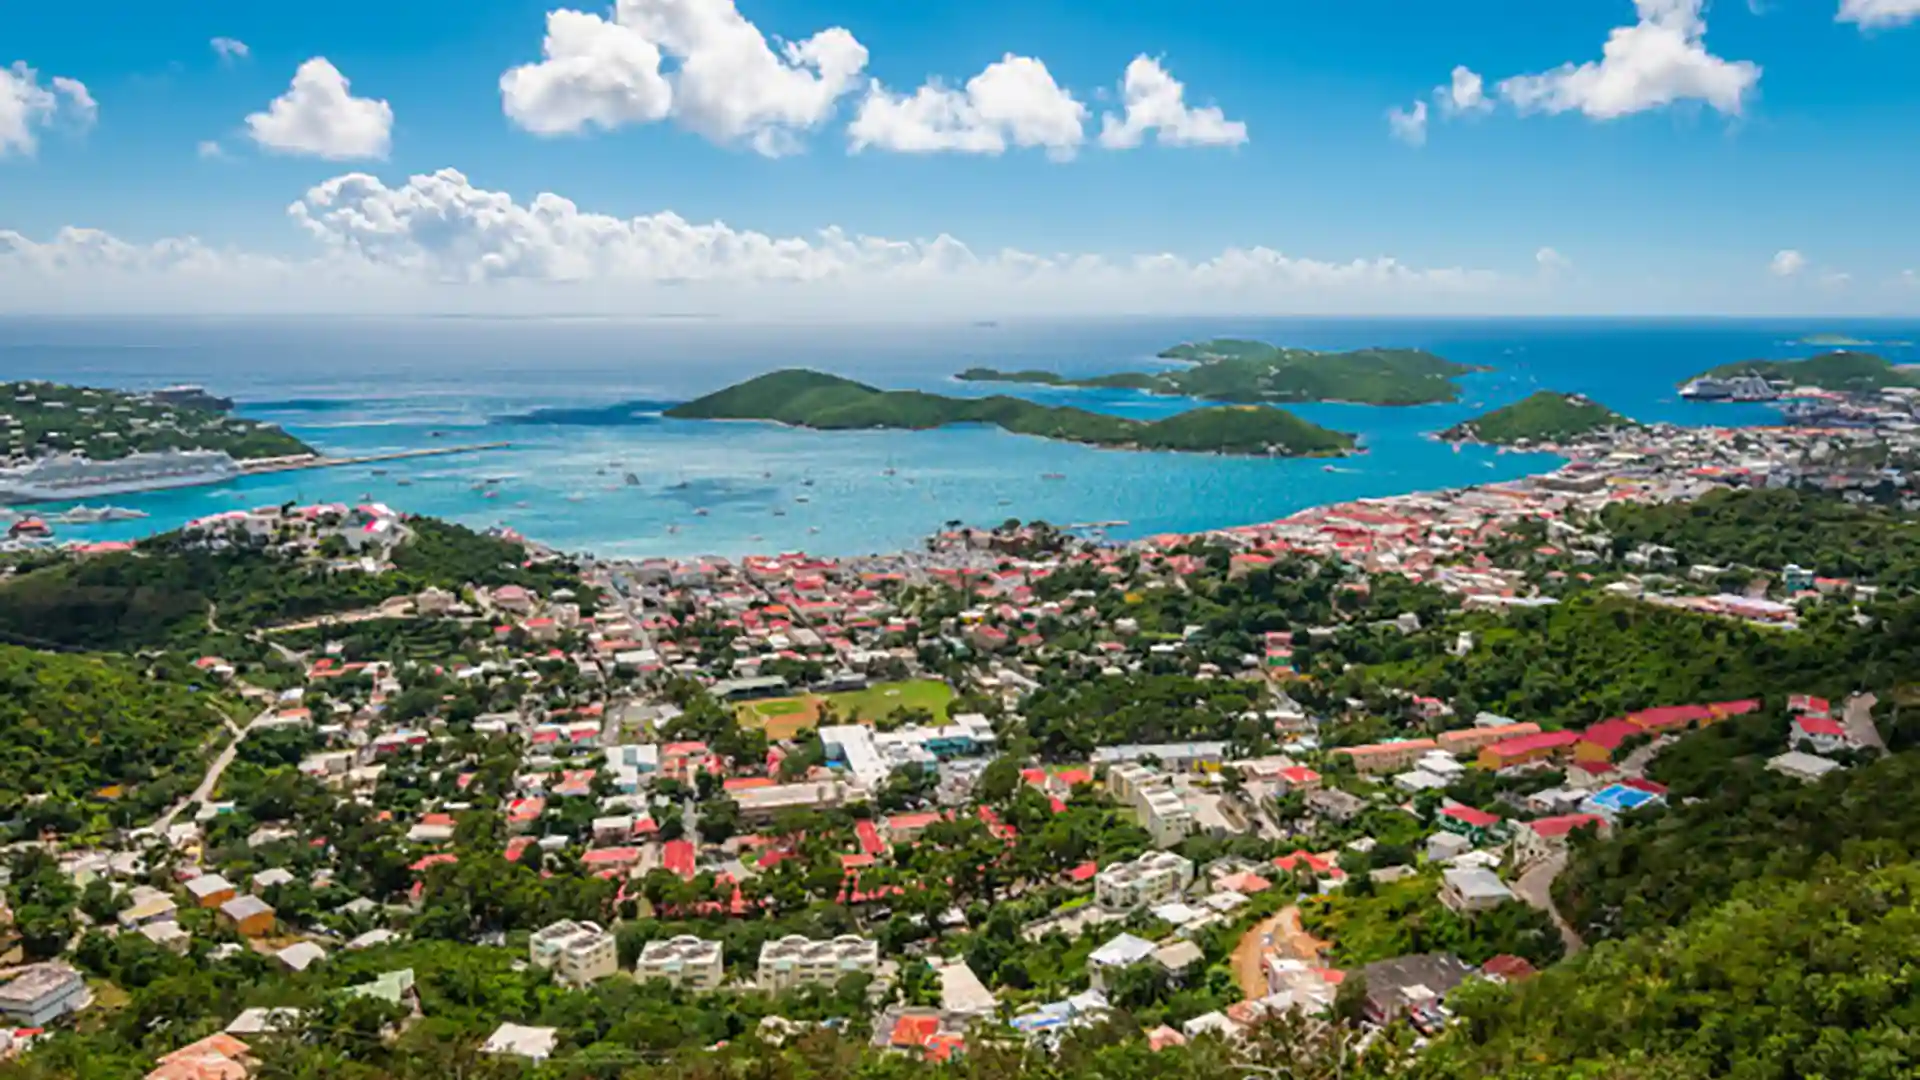 Aerial view of St. Thomas, which is part of the U.S. Virgin Islands.